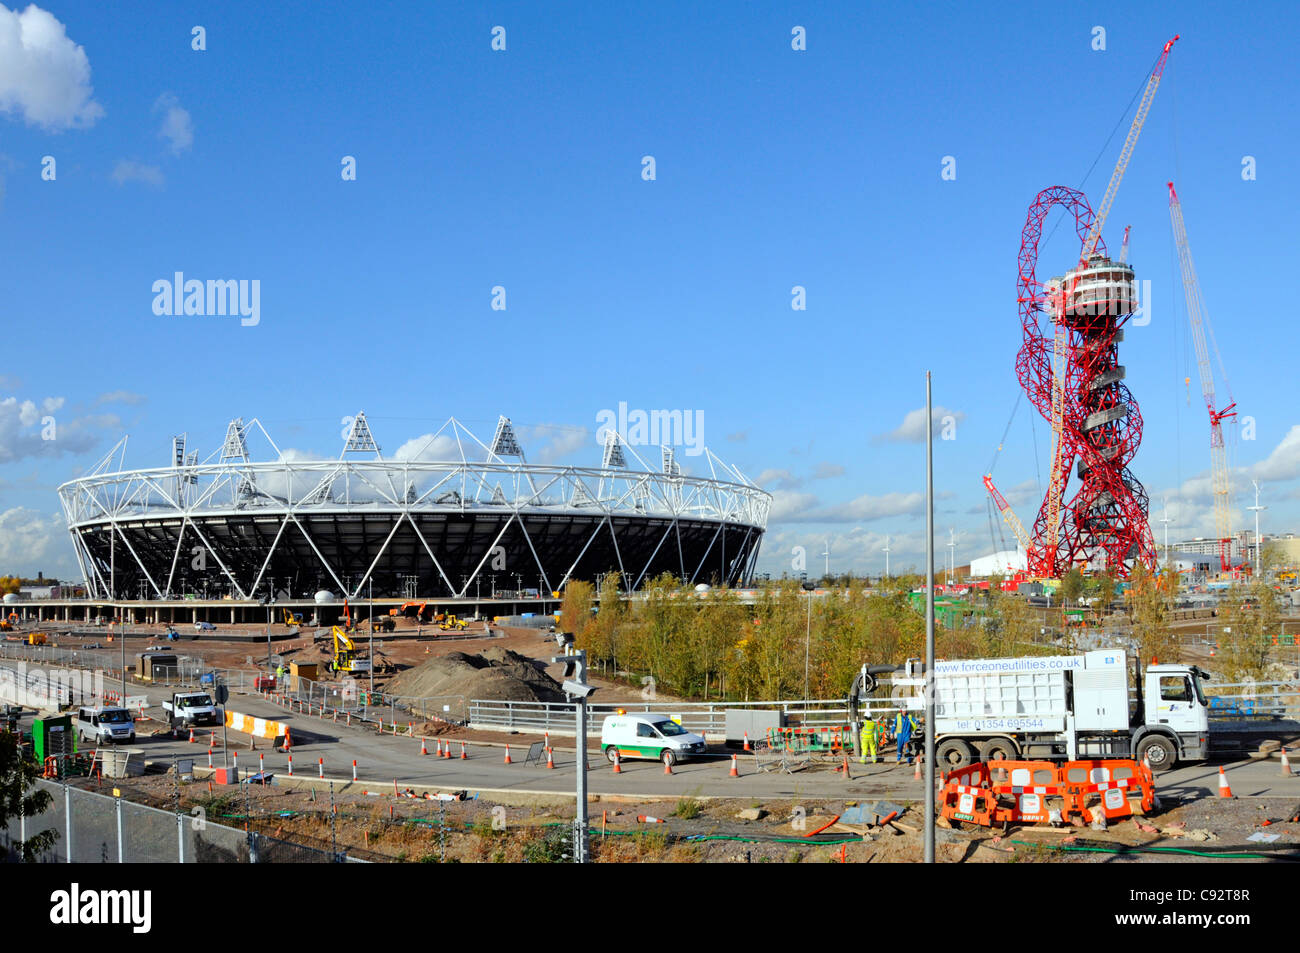 2012 Olympic stadium & Orbit Tower construction projects nearing completion in the London Olympic park Stock Photo